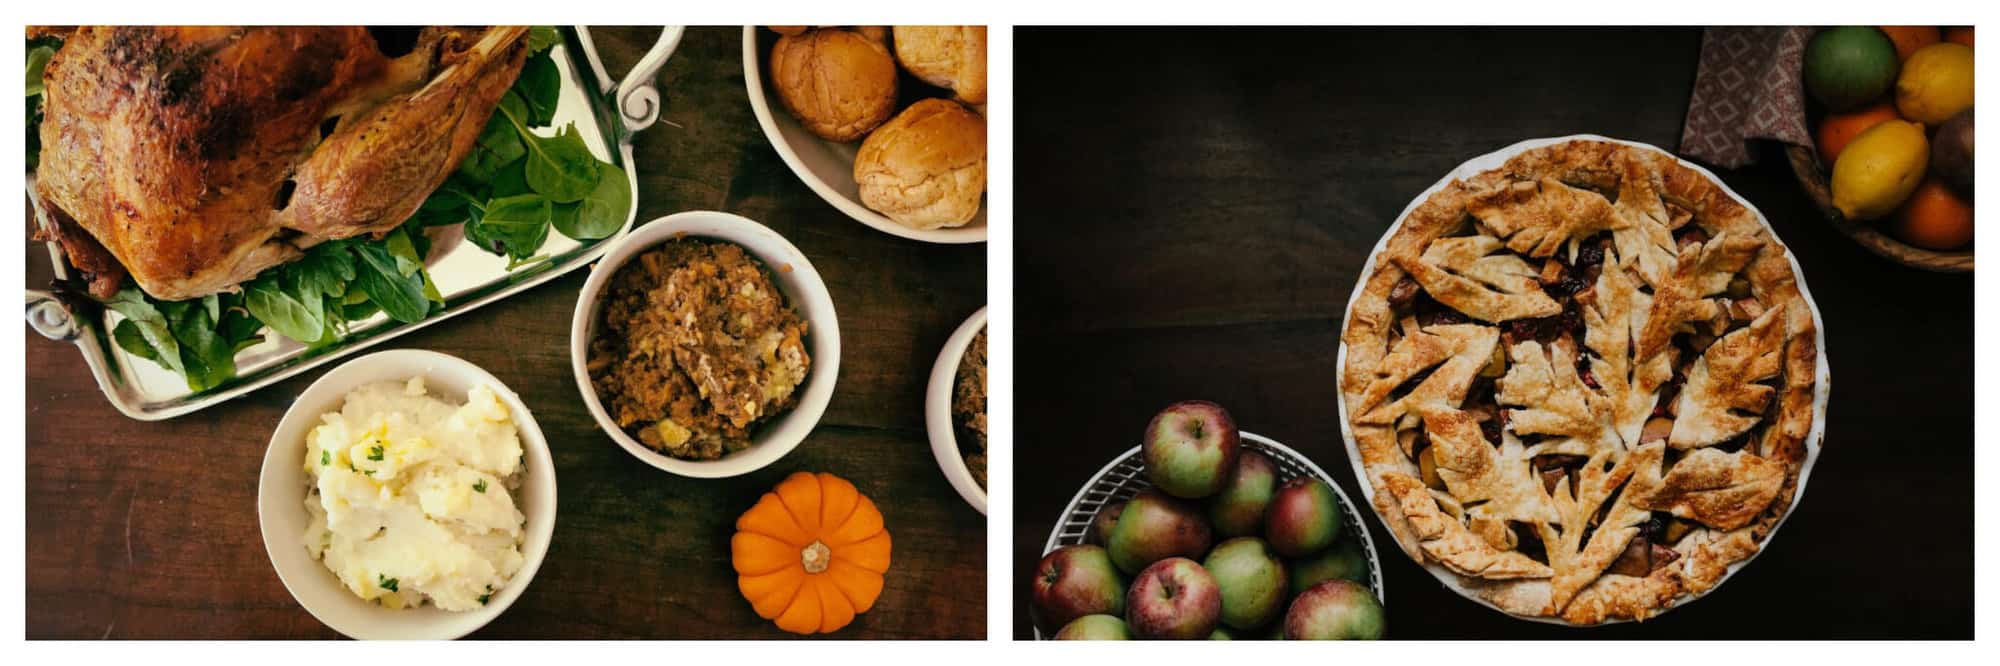 Left: an aerial view of a turkey, mashed potatoes, stuffing, and dinner rolls on a wooden table. There are greens under the turkey, and there is a small pumpkin as decoration. Right: an aerial view of an apple pie with a bowl of apples and another bowl of citrus fruits. The pie crust is made in the shape of leaves. 